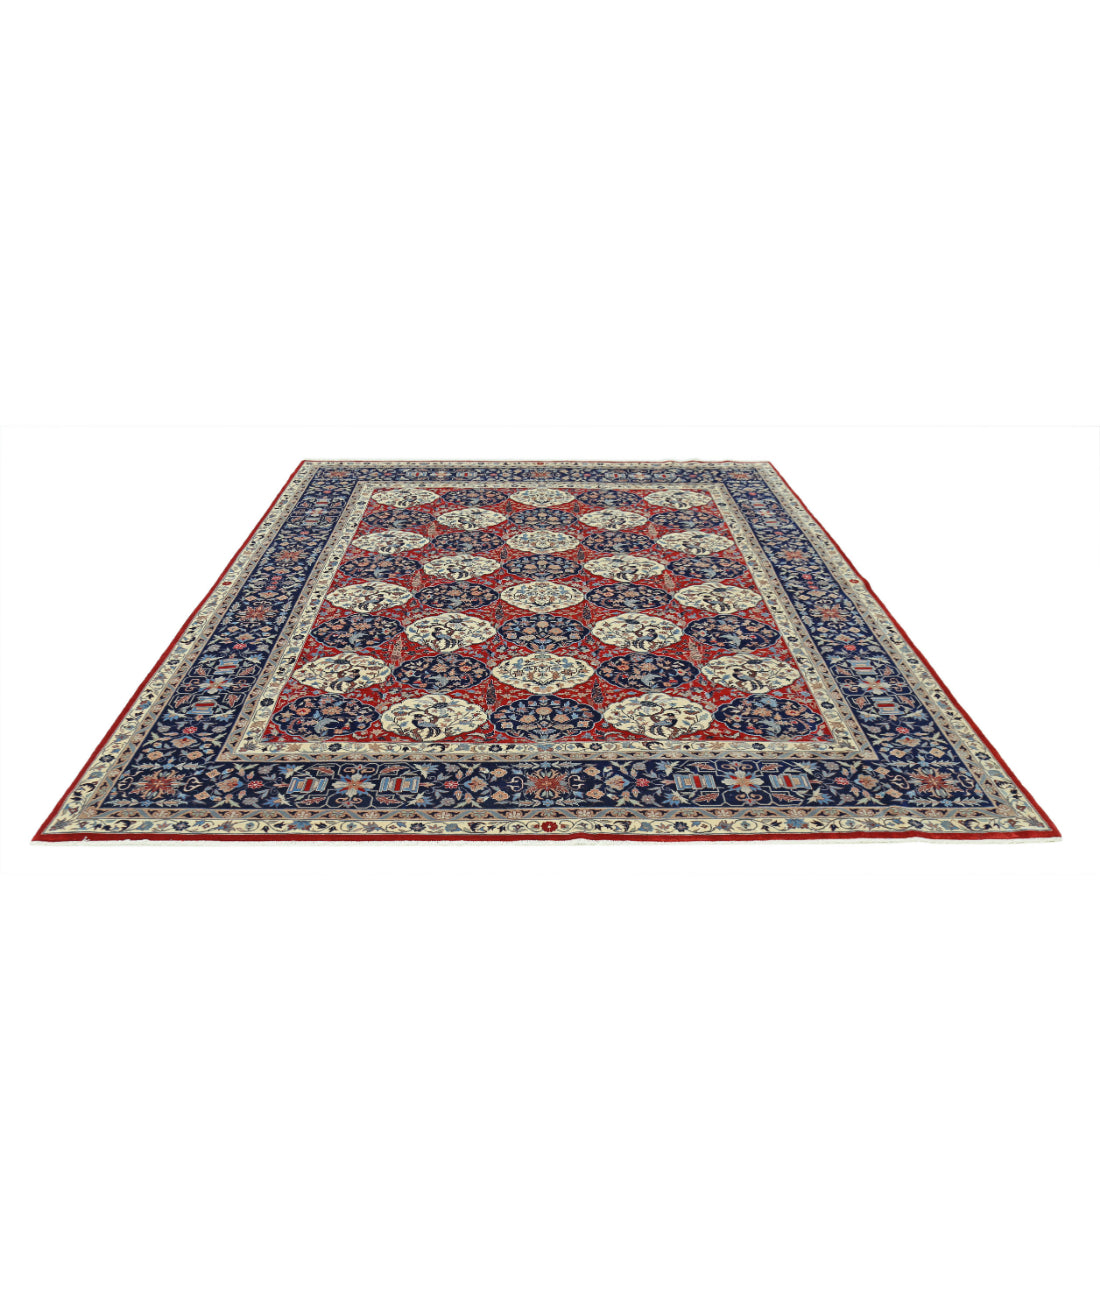 Heritage 8'1'' X 10'0'' Hand-Knotted Wool Rug 8'1'' x 10'0'' (243 X 300) / Red / Blue